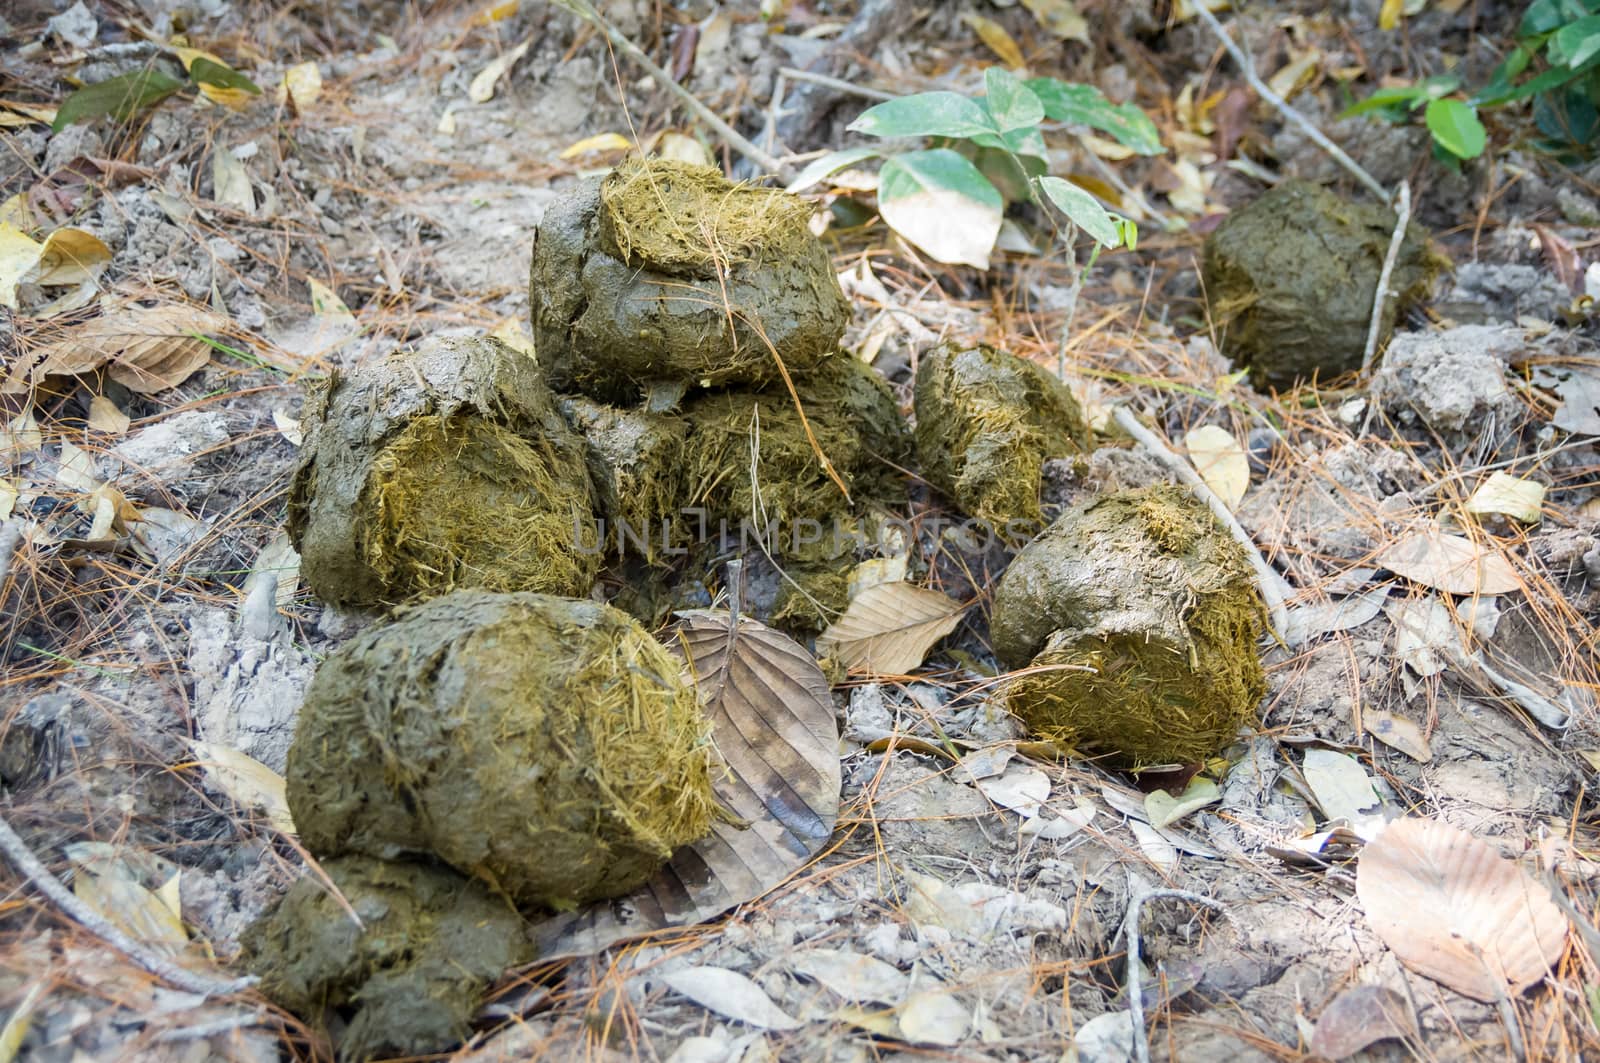 Elephant dung in forest at Thailand.